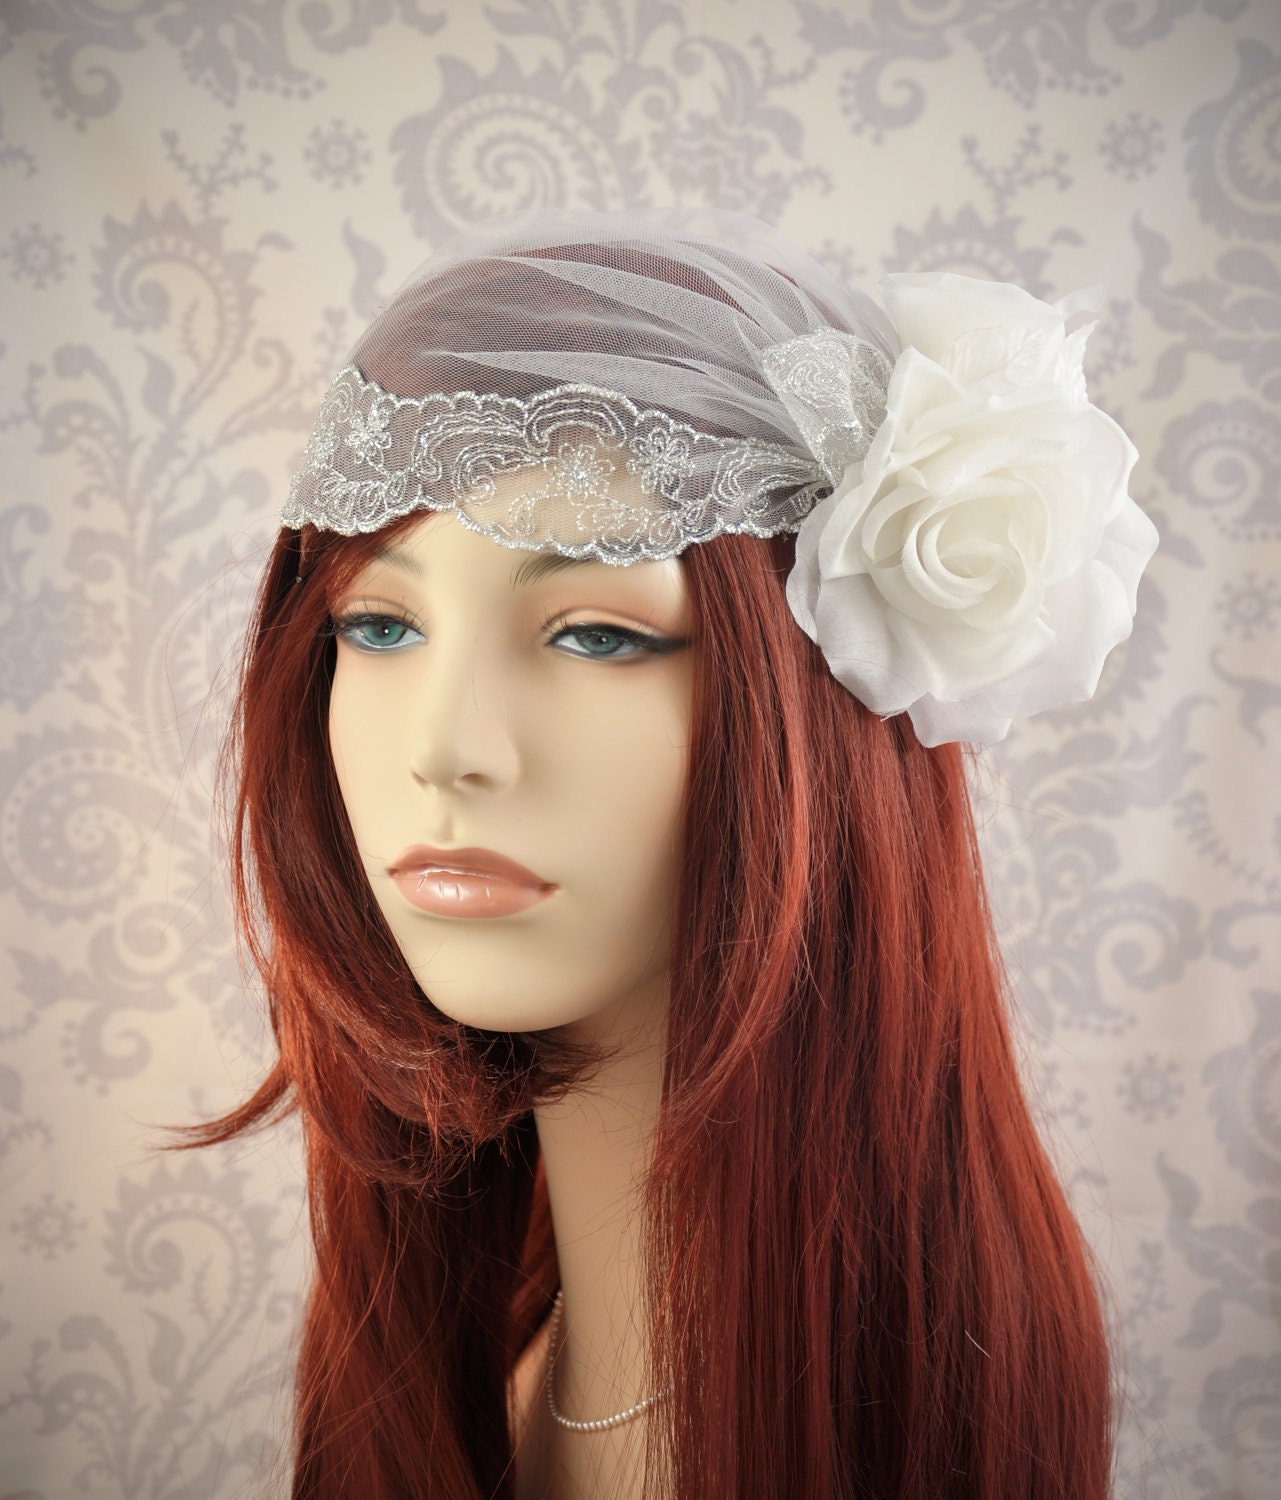 Lace Cap Bridal Cap Veil with Flowers Silver and White Wedding Veil 